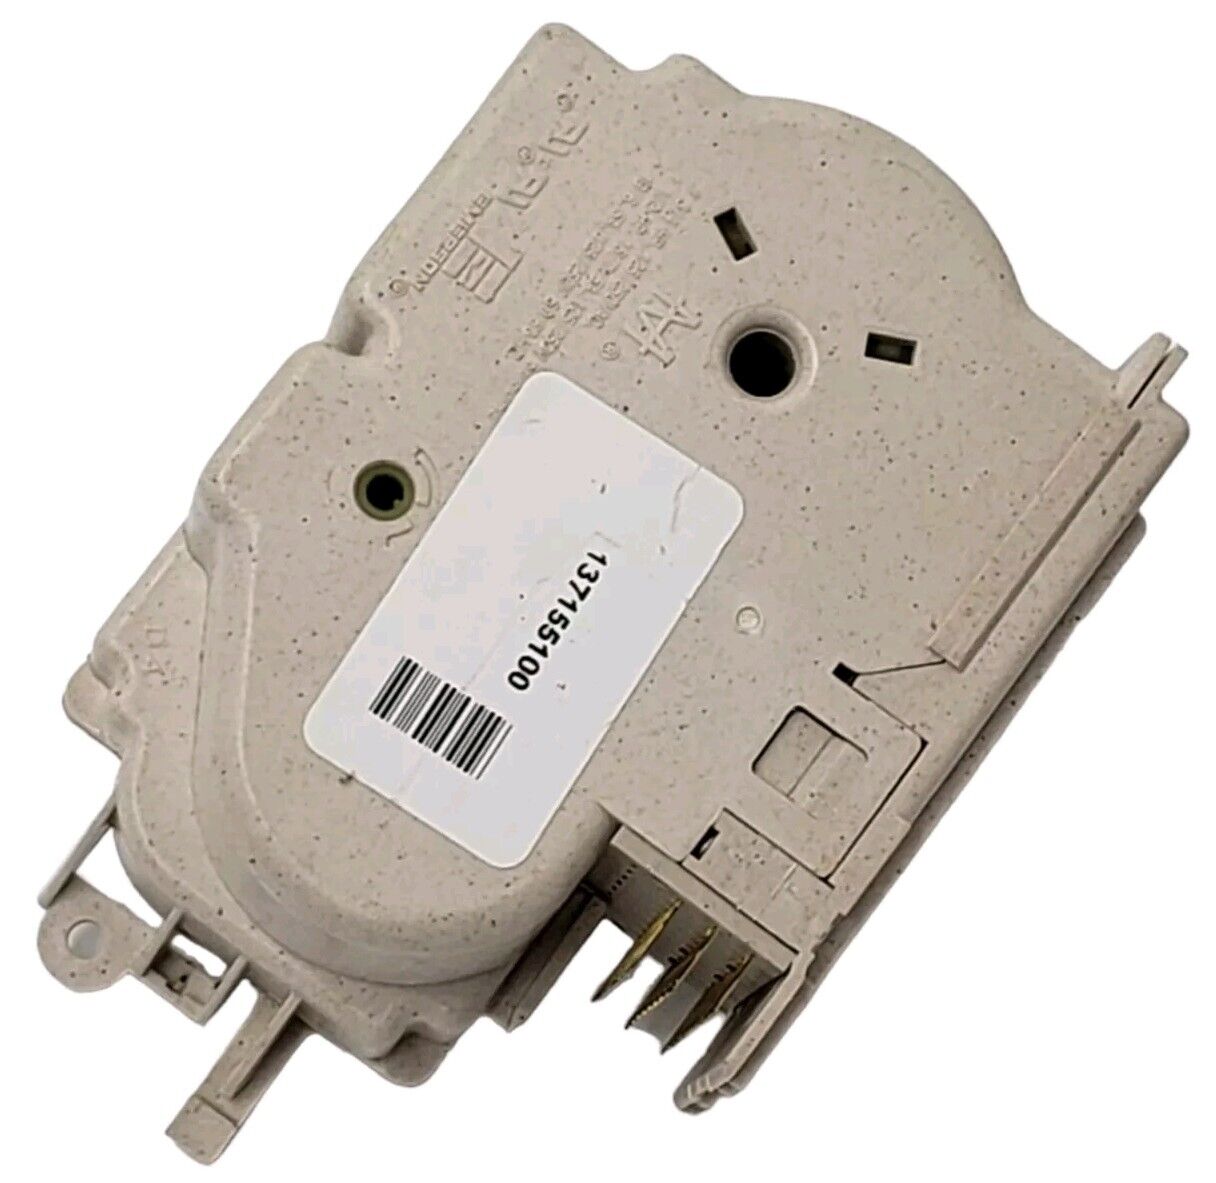 OEM Replacement for Frigidaire Washer Timer 137155100